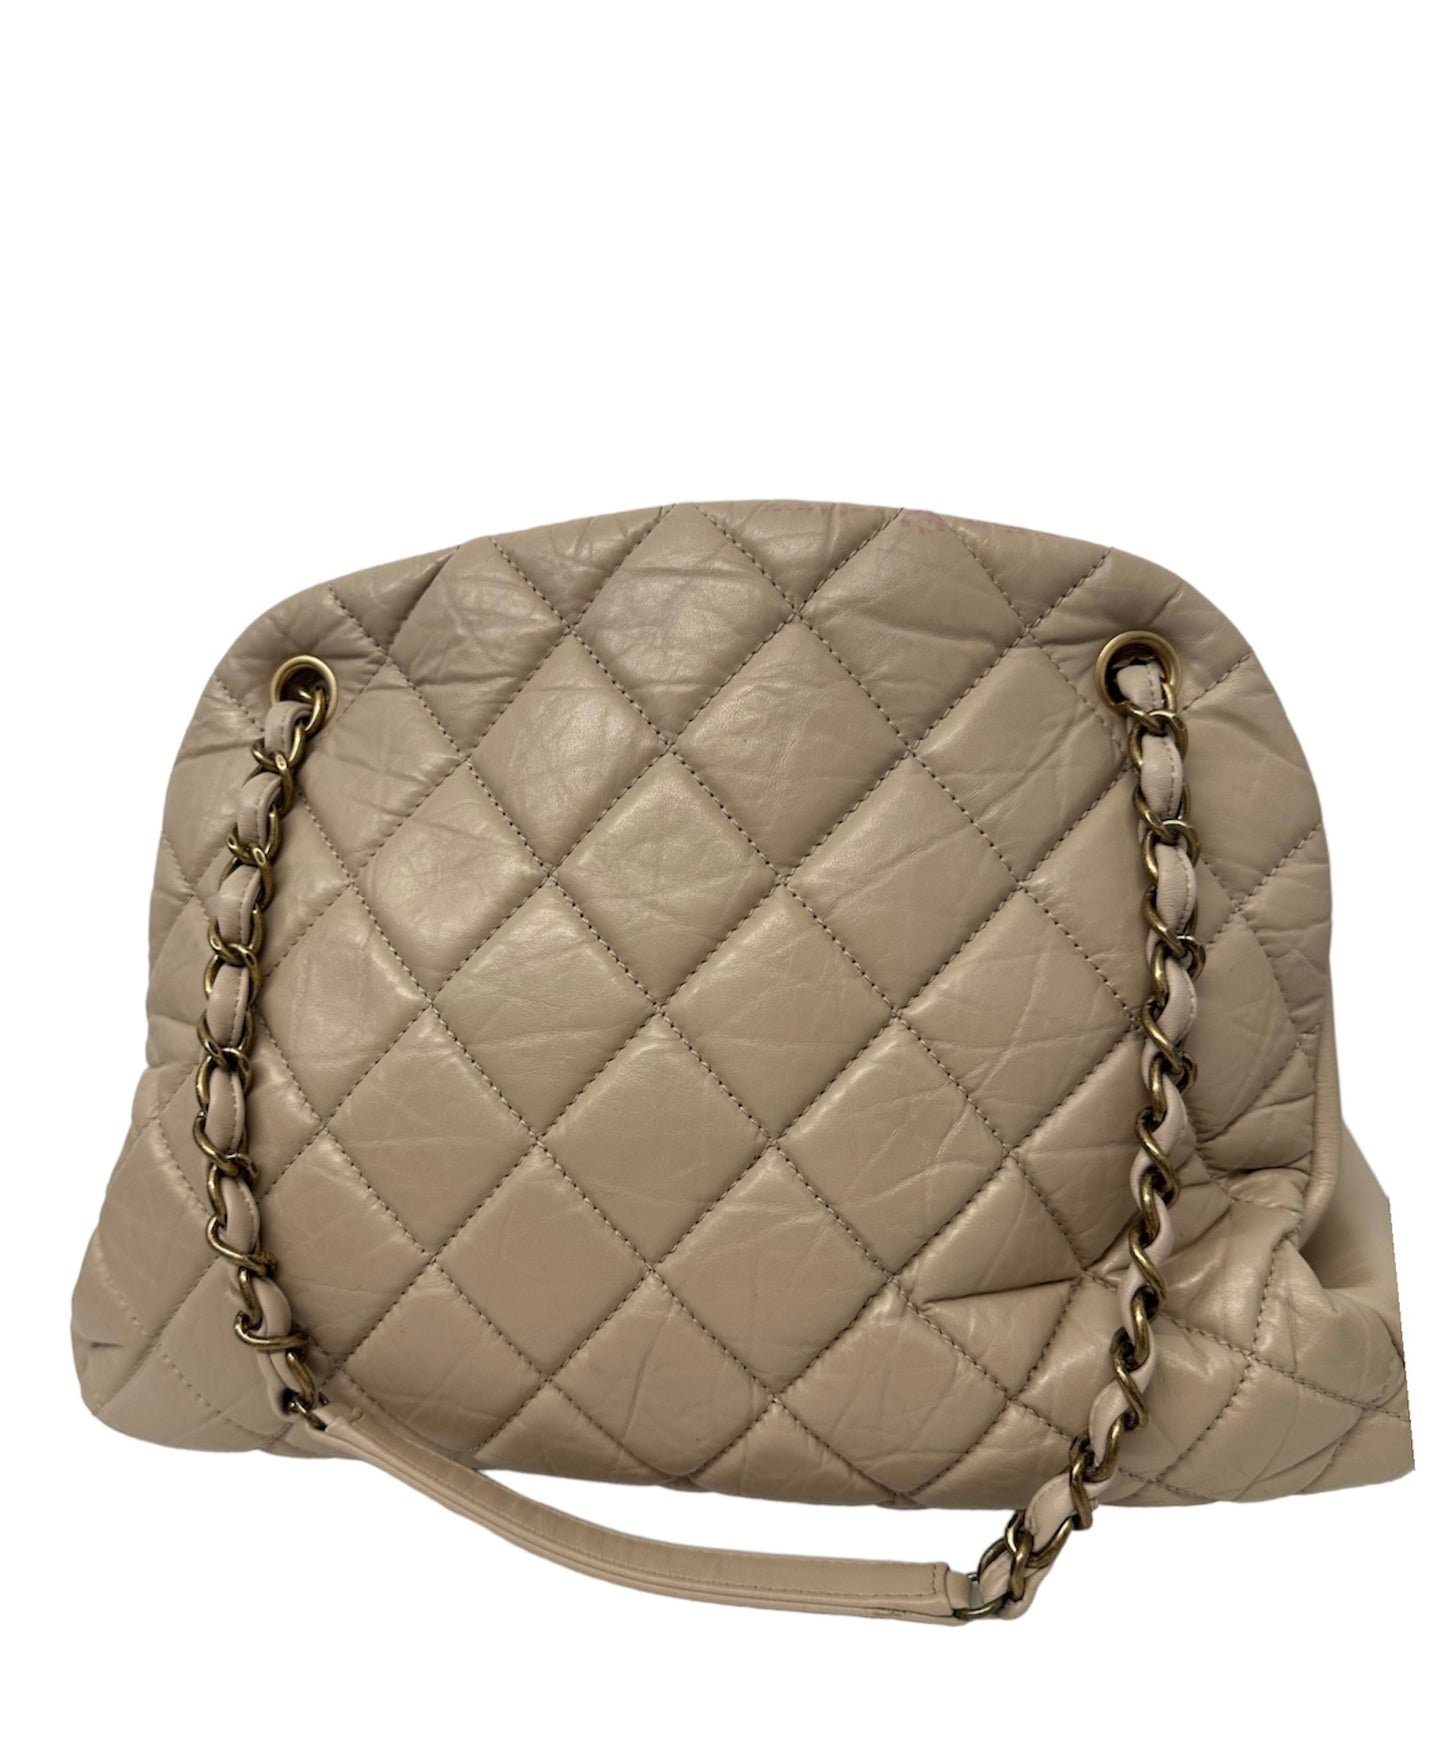 CHANEL - Beige Crinkled Leather Large Mademoiselle Just Bowling Bag